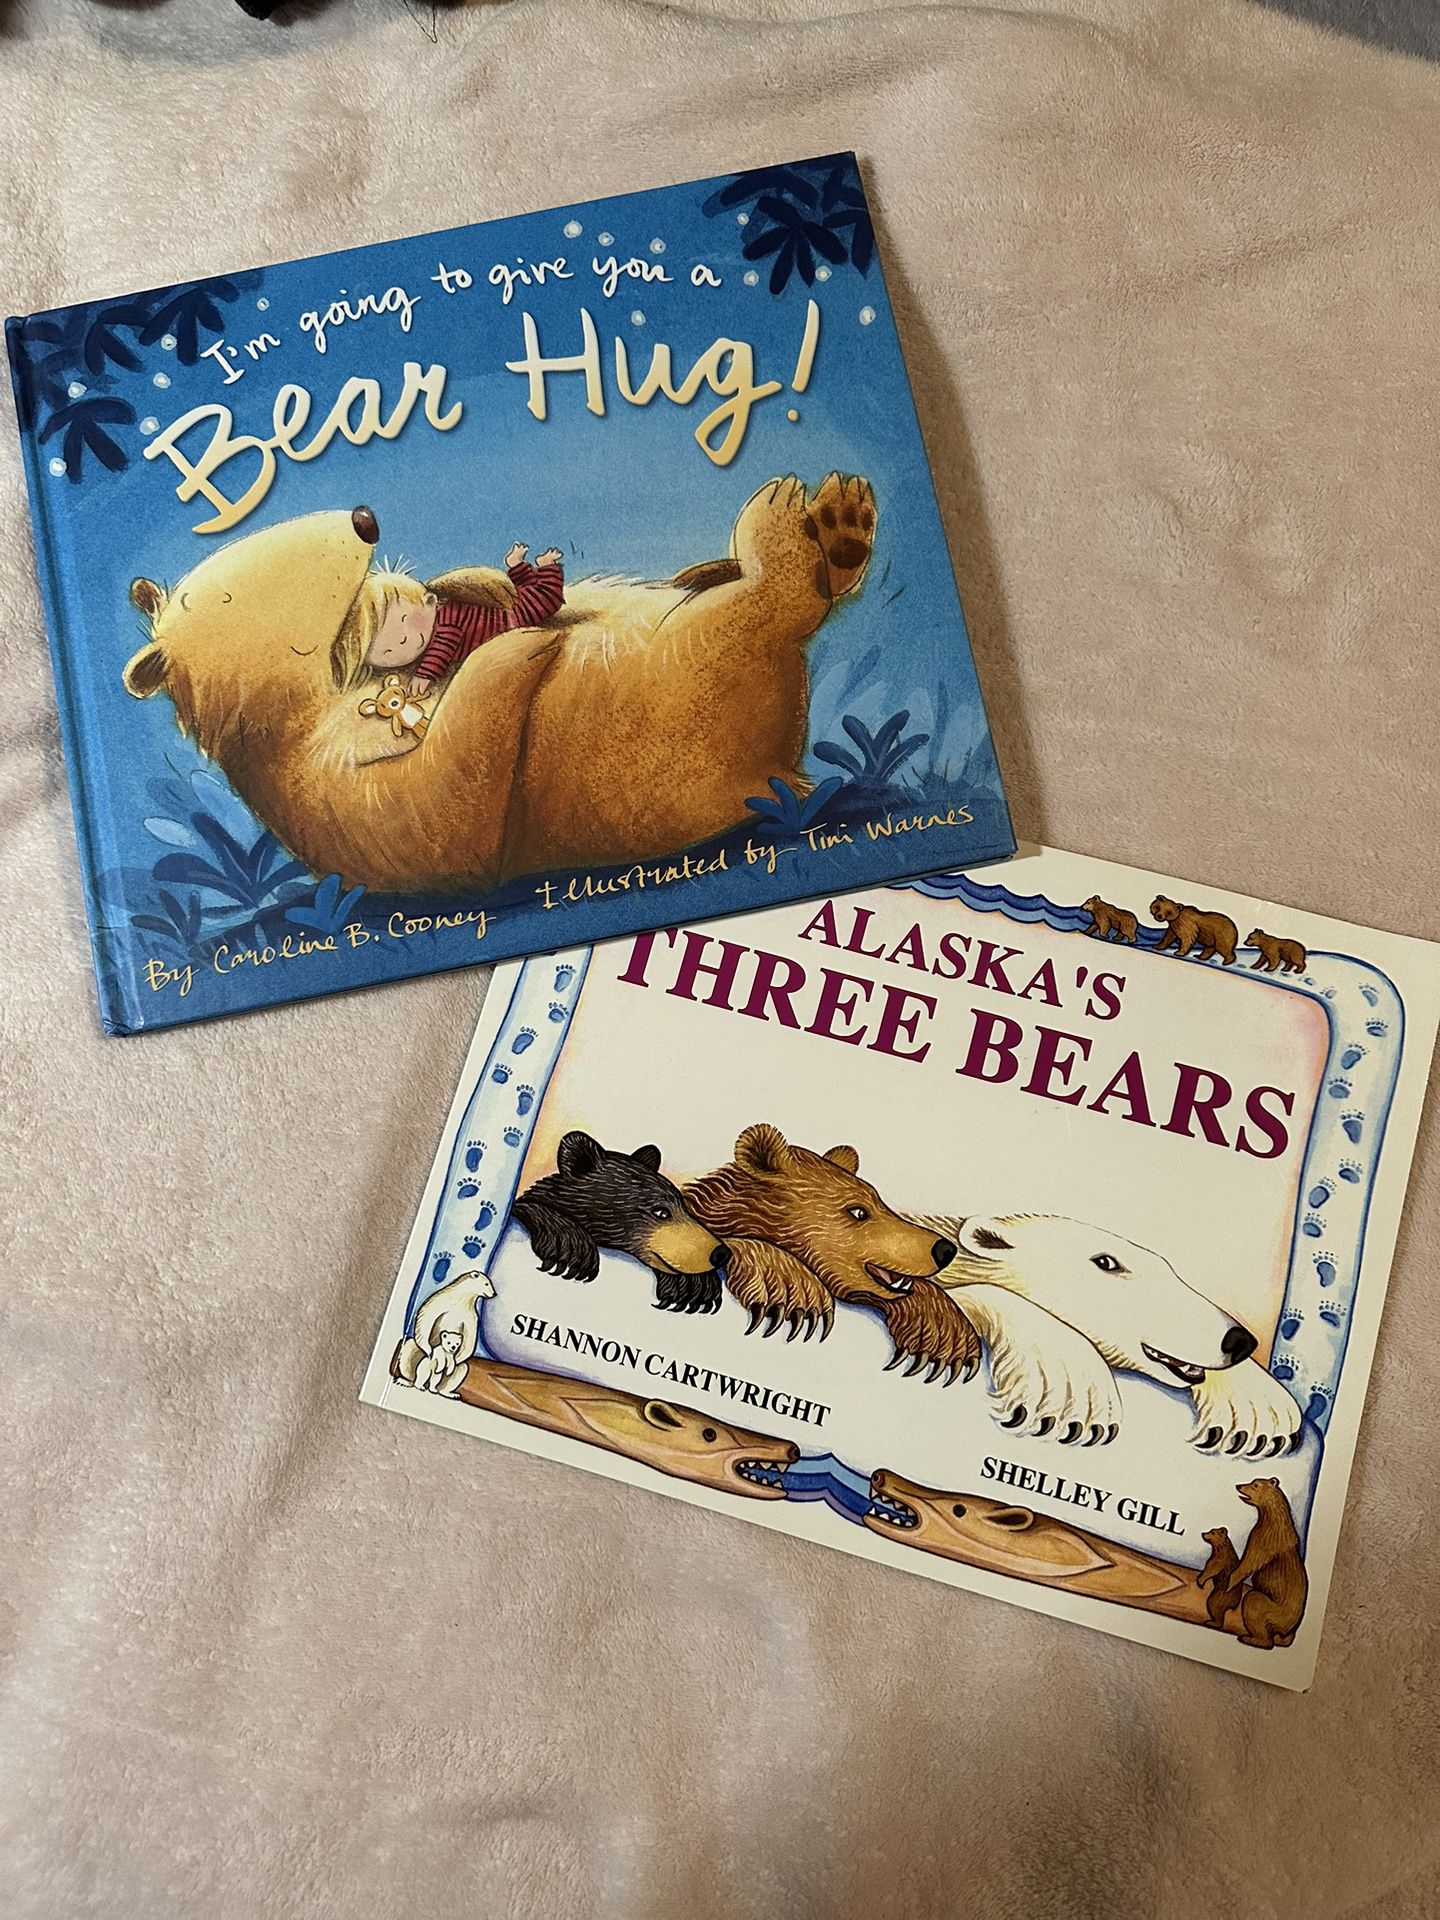 Gently Used Children’s Books, 2, One Hardcover, And One Soft